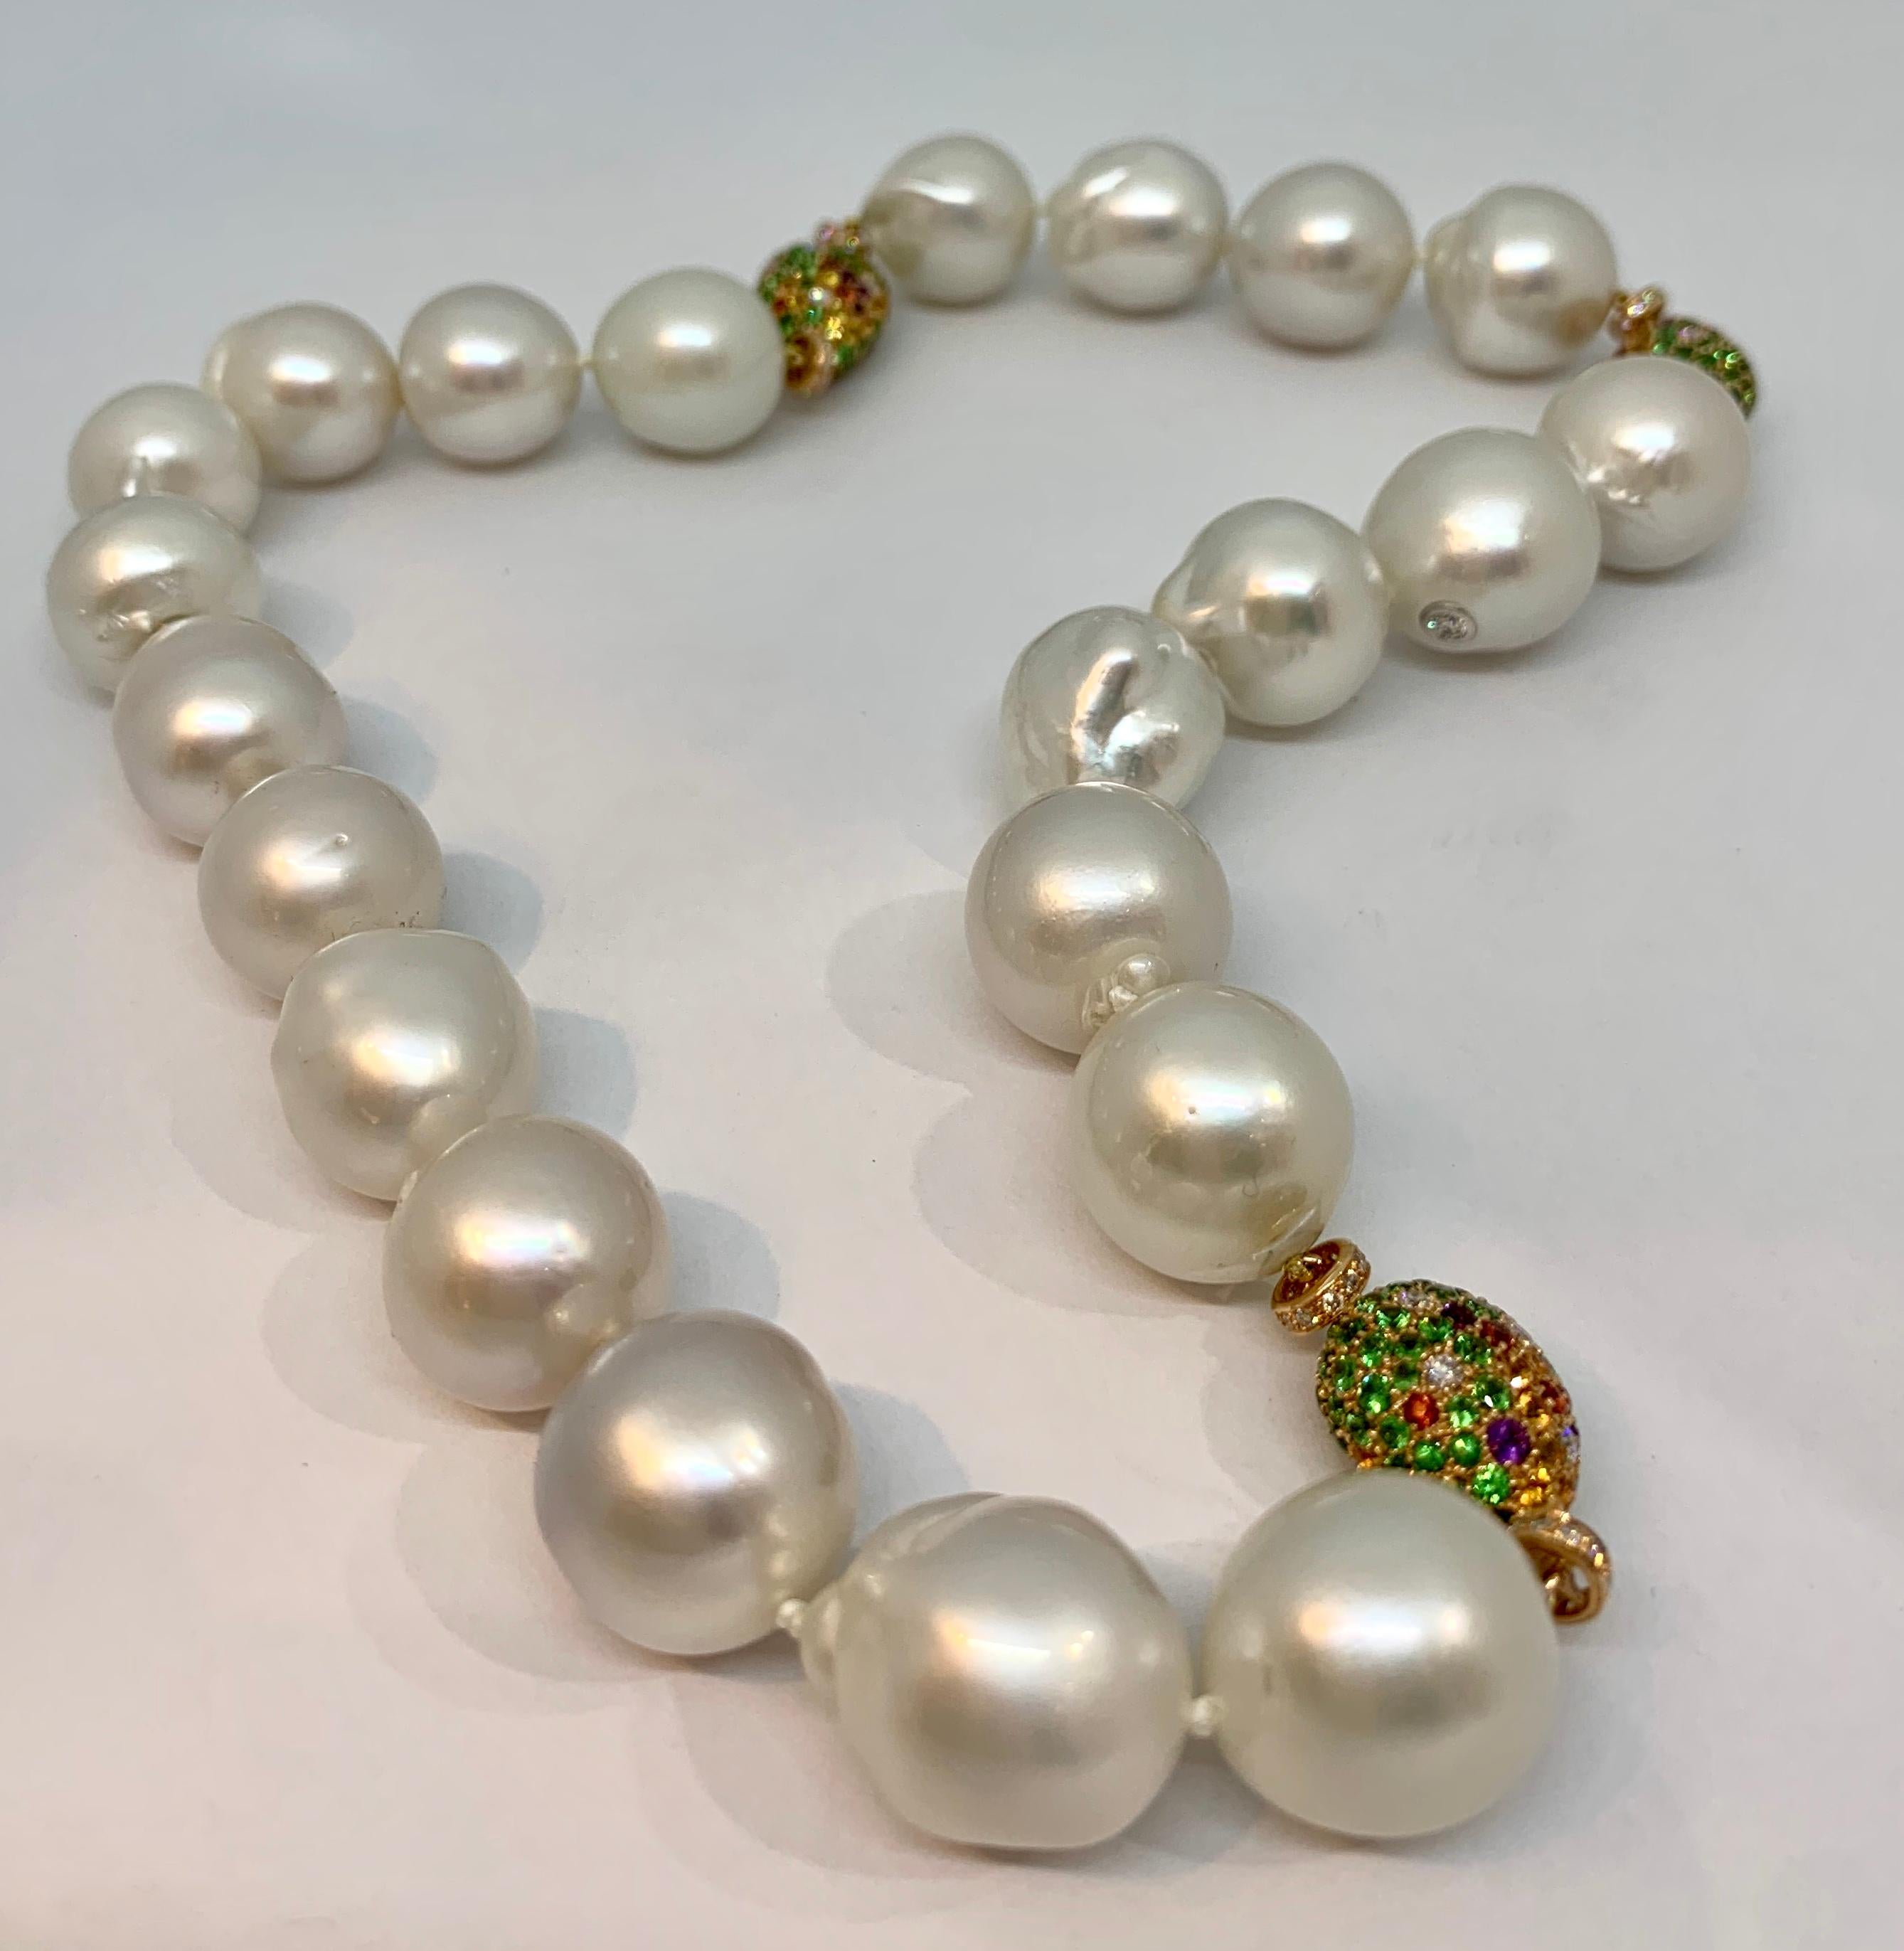 Margot McKinney South Sea Pearl Necklet featuring twenty-two White Baroque 15.5-18mm pearls and enhanced with three 18 karat Pink Gold, Diamond, Yellow Sapphire, Orange Sapphire, Tsavorite, Amethyst Pebbles finished with an 18 karat White Gold